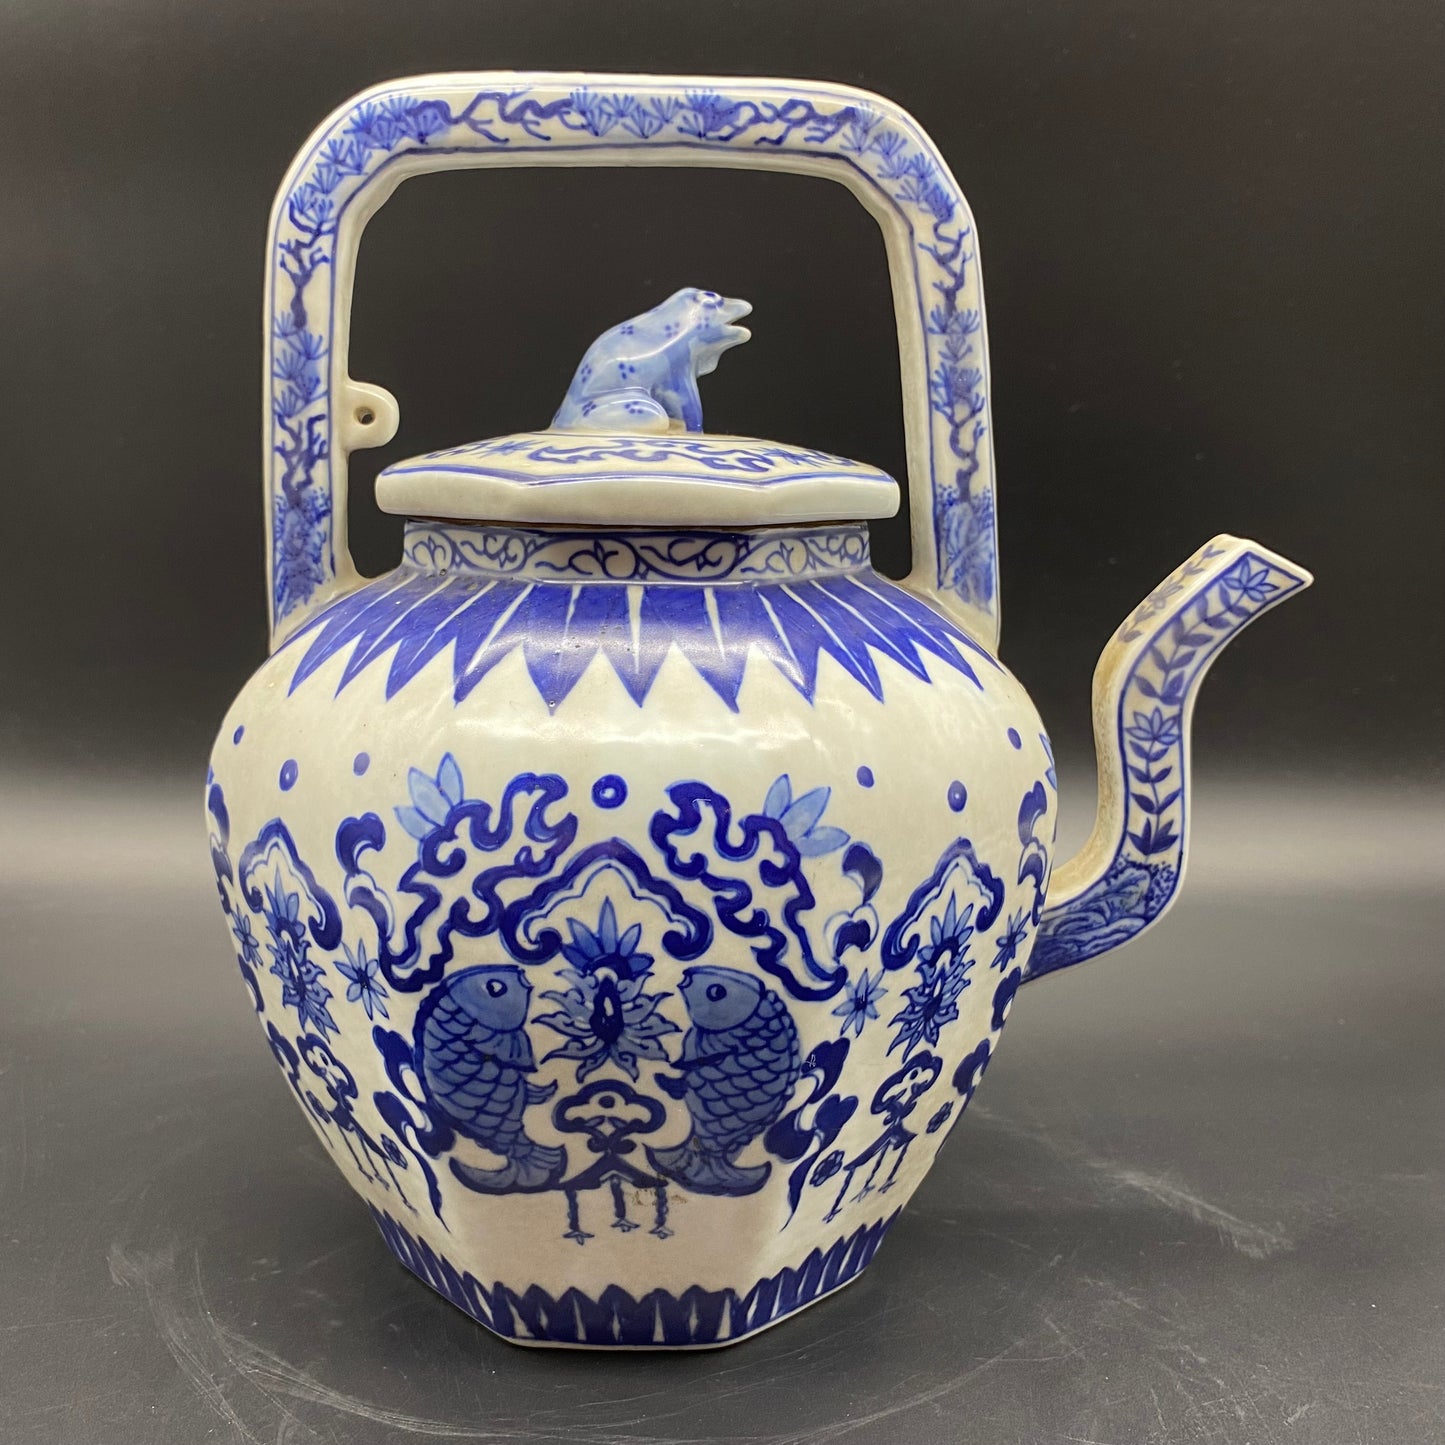 Chinese Tea Pot Circa Qing Dynasty period, 18th/19th century. Very good condition; No chips, cracks or repairs.